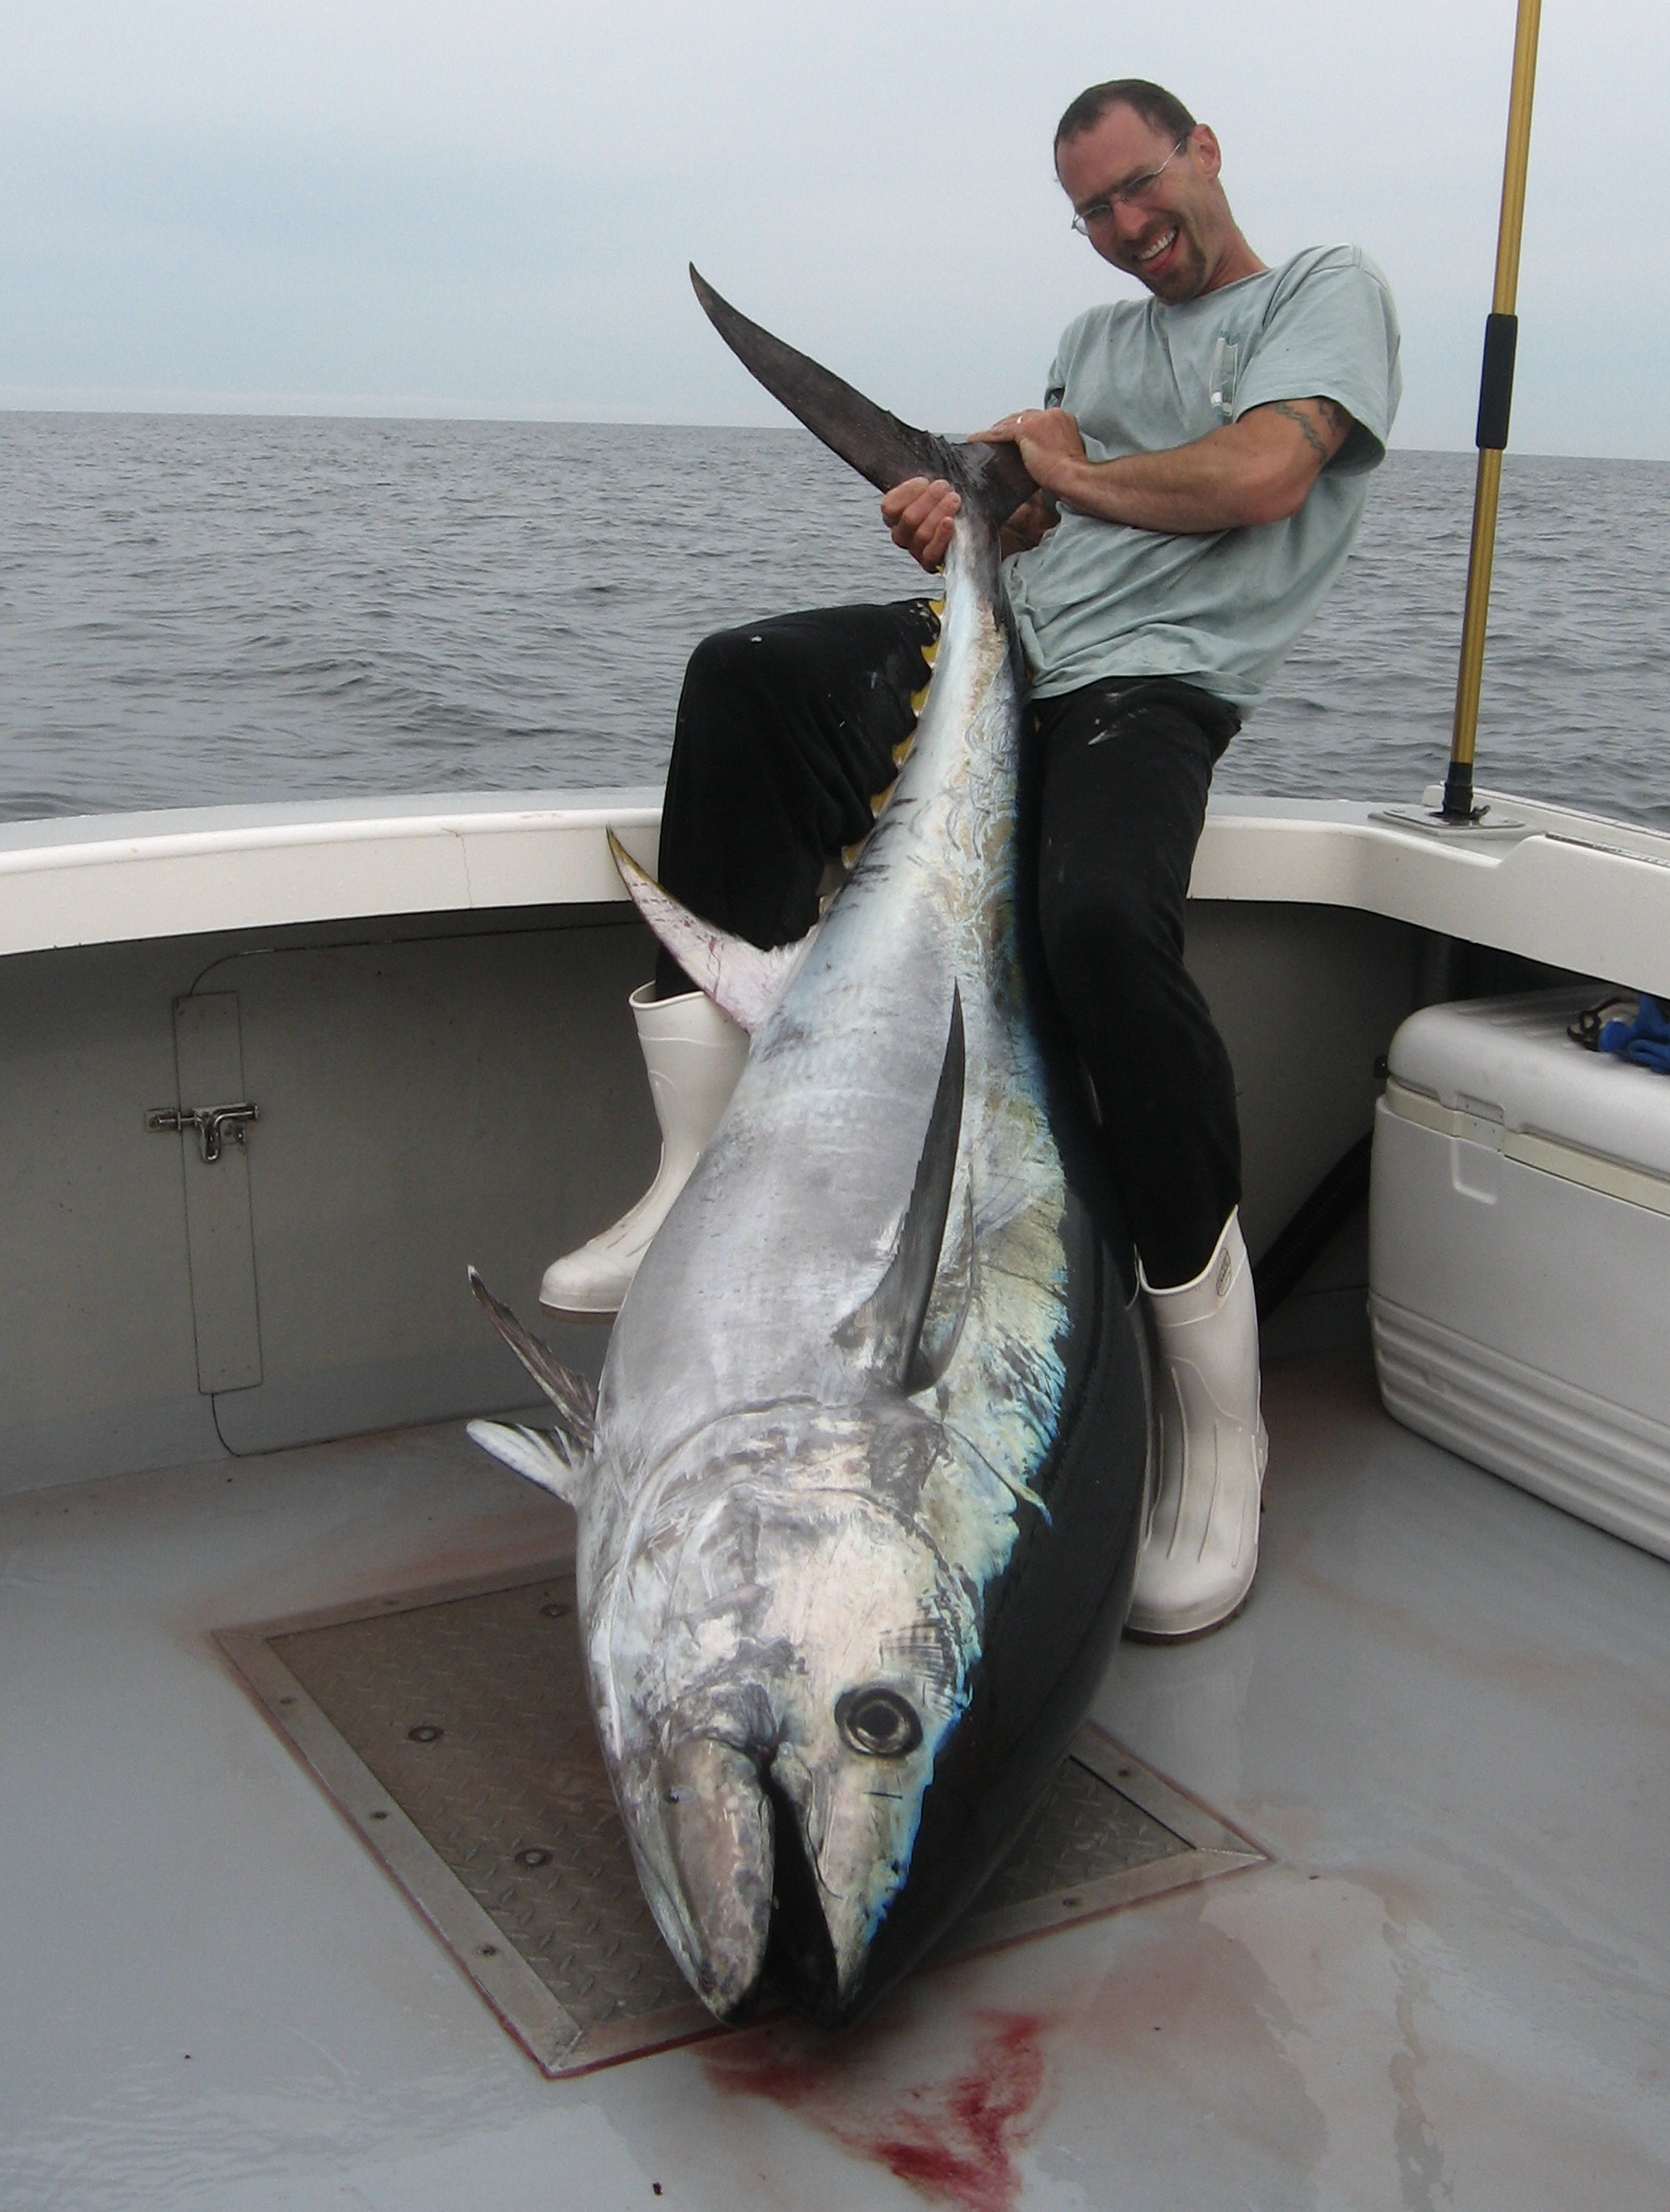 kerry Miller with a 77" Bluefin tuna caught June 5th 2009